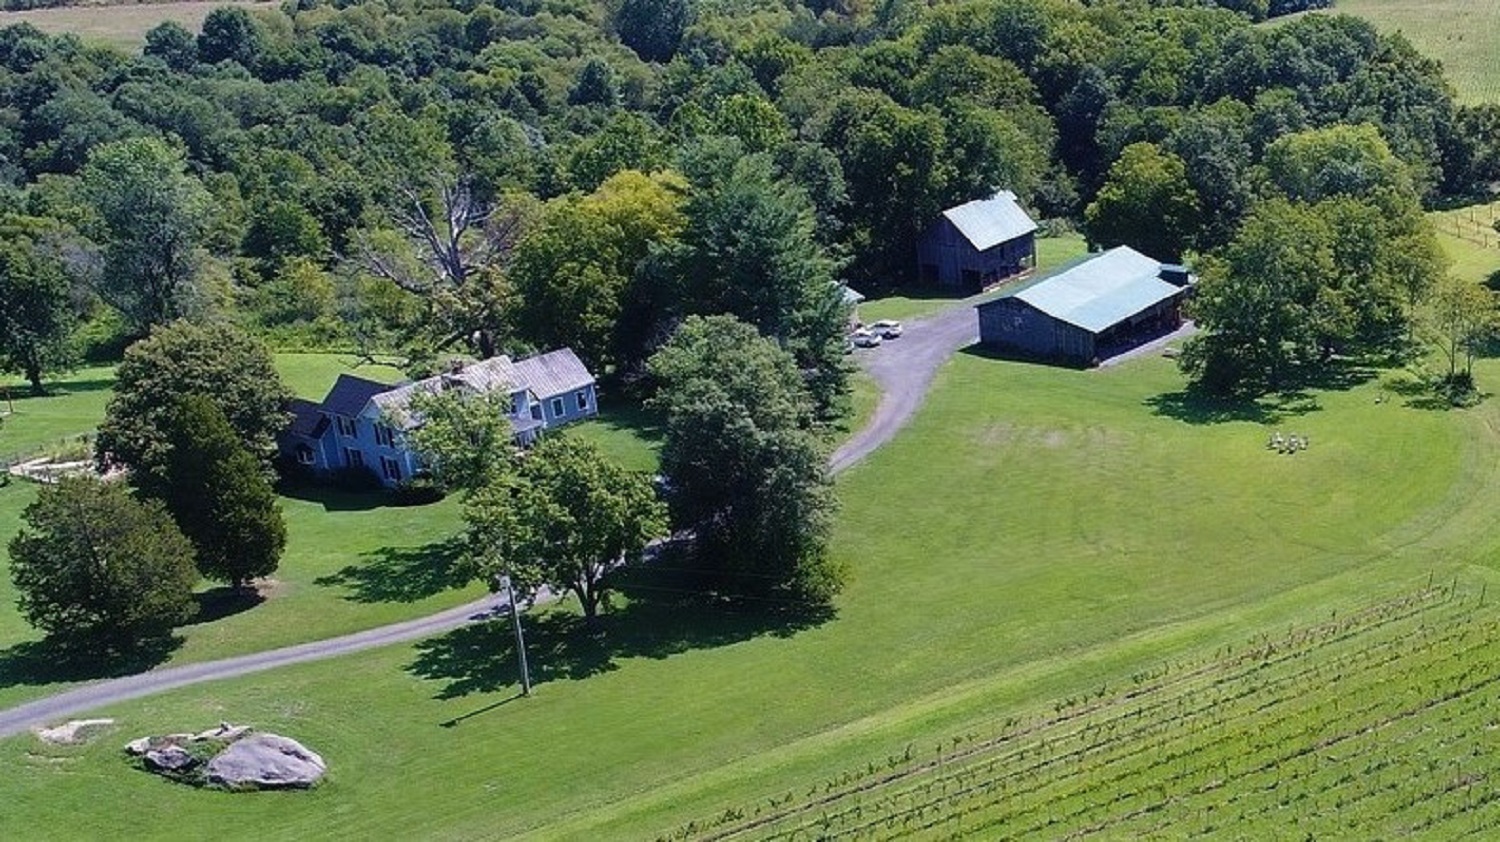 Drone view of the barns and house